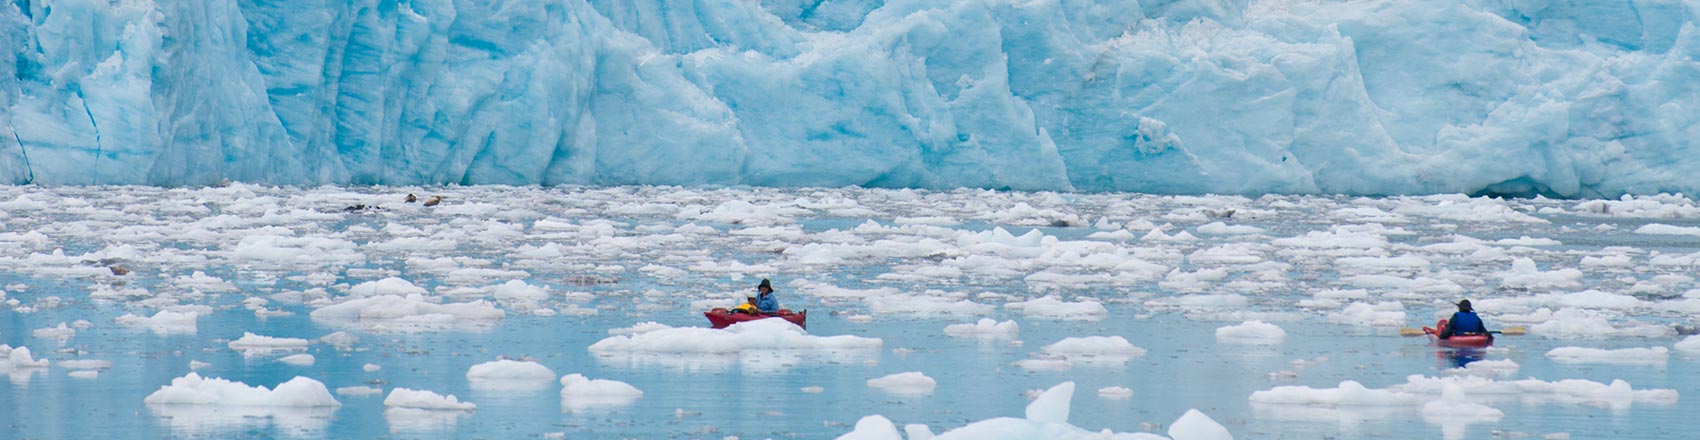 Two kayakers paddling through water filled with icebergs with a glacier in the background.